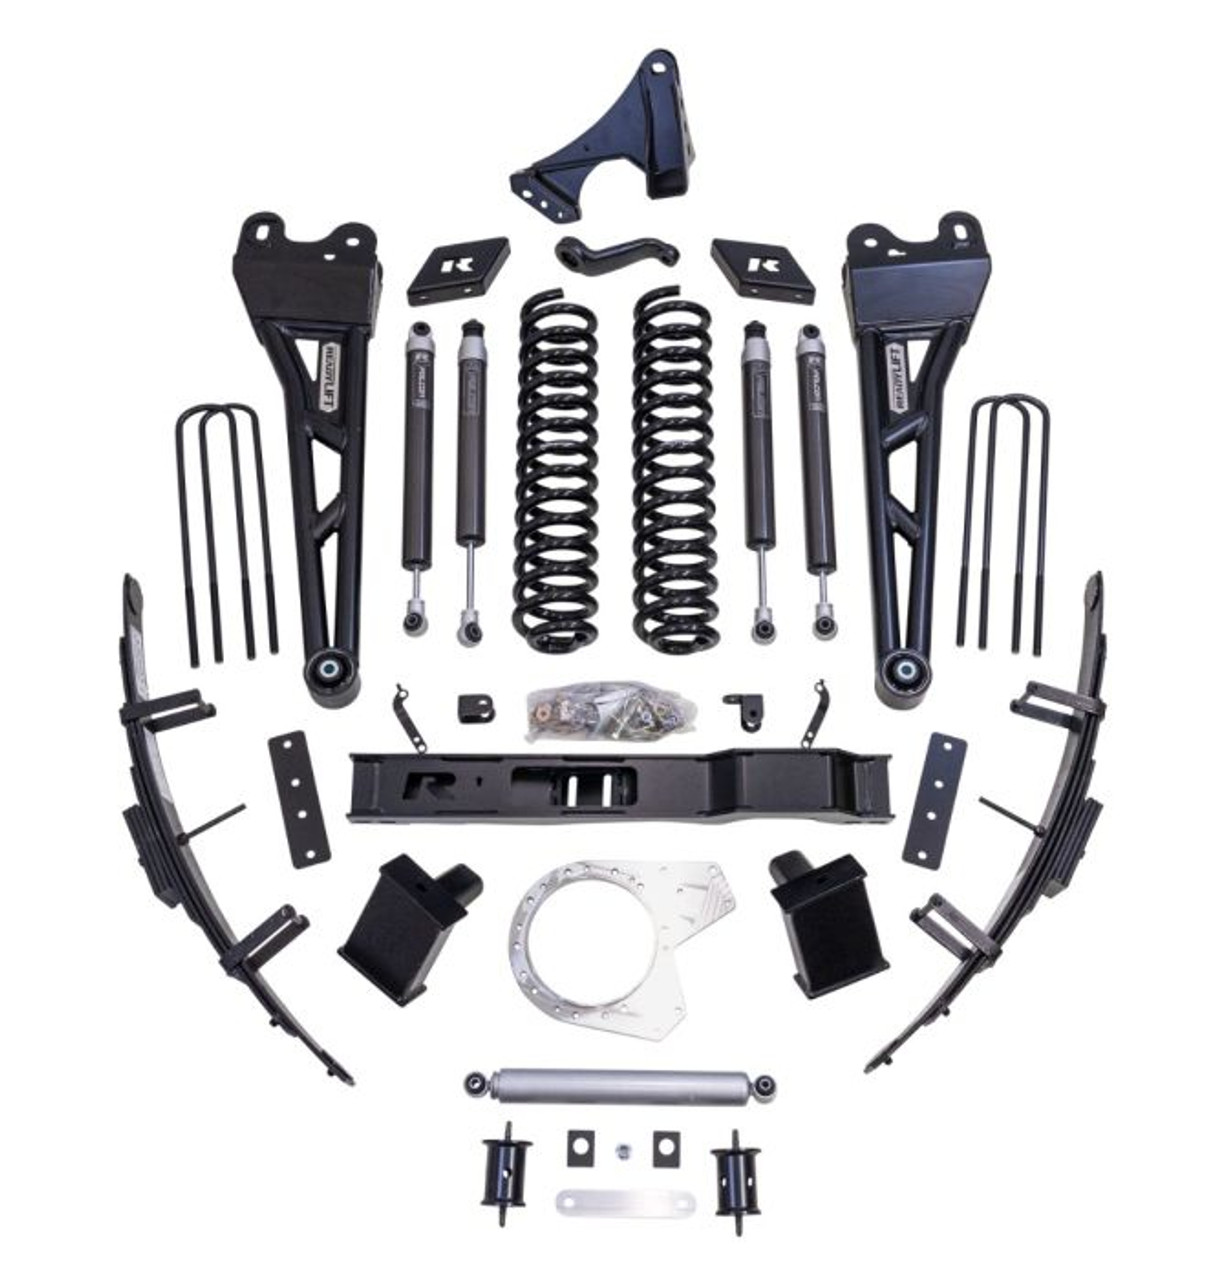 ReadyLift 8.5" LIFT KIT W/ FALCON SHOCKS AND RADIUS ARMS for 2017 to 2022 Ford F250/F350 4WD 6.7L Powerstroke - Main View